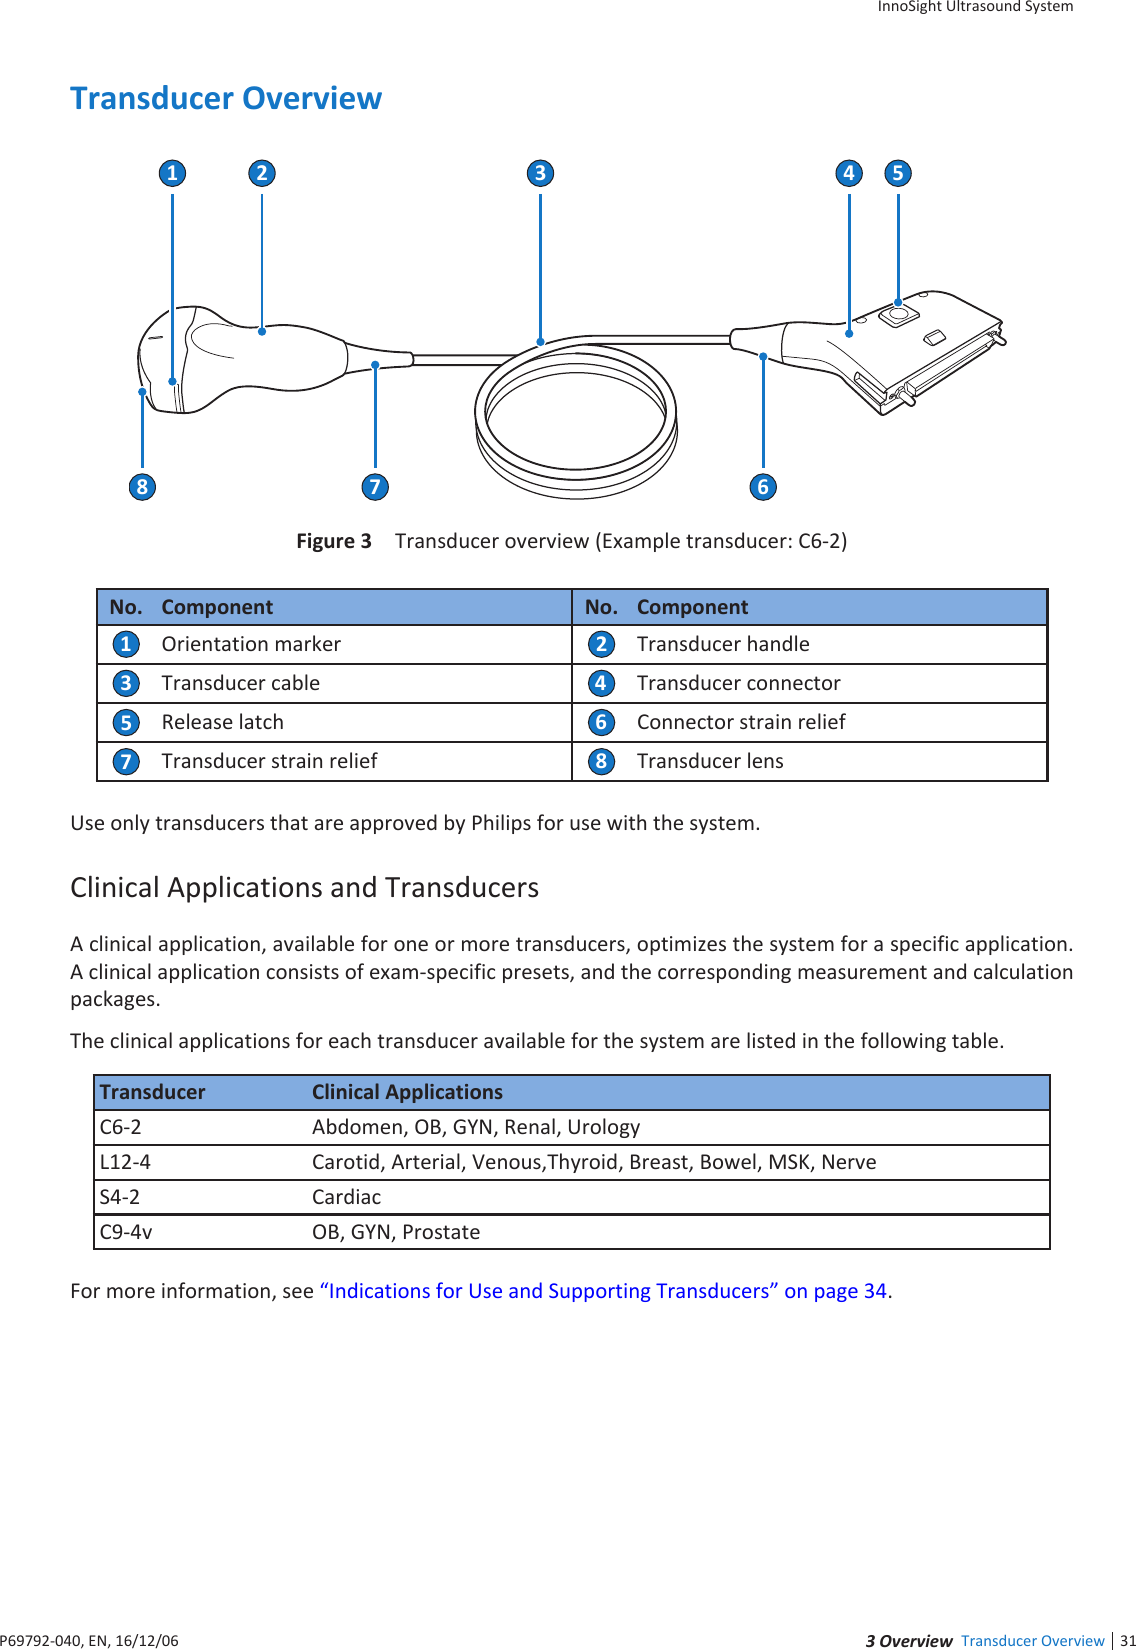 31 eie Transducer OverviewInnoSight Ultrasound SystemP6992-4, EN, 16/12/6Transducer Overview28375164Figure 3Transducer overview (Example transducer: C6-2)No. Component No. Component1Orientation marker2Transducer handle3Transducer cable4Transducer connector5Release latch6Connector strain relief7Transducer strain relief8Transducer lensUse only transducers that are approved by Philips for use with the systemClinical Applications and TransducersA clinical application, available for one or more transducers, optimizes the system for a specific application A clinical application consists of exam-specific presets, and the corresponding measurement and calculation packagesThe clinical applications for each transducer available for the system are listed in the following tableTransducer Clinical ApplicationsC6-2 Abdomen, OB, GYN, Renal, UrologyL12-4 Carotid, Arterial, Venous,Thyroid, Breast, Bowel, MS, NerveS4-2 CardiacC9-4v OB, GYN, ProstateFor more information, see Indications for Use and Supporting Transducers on page 34